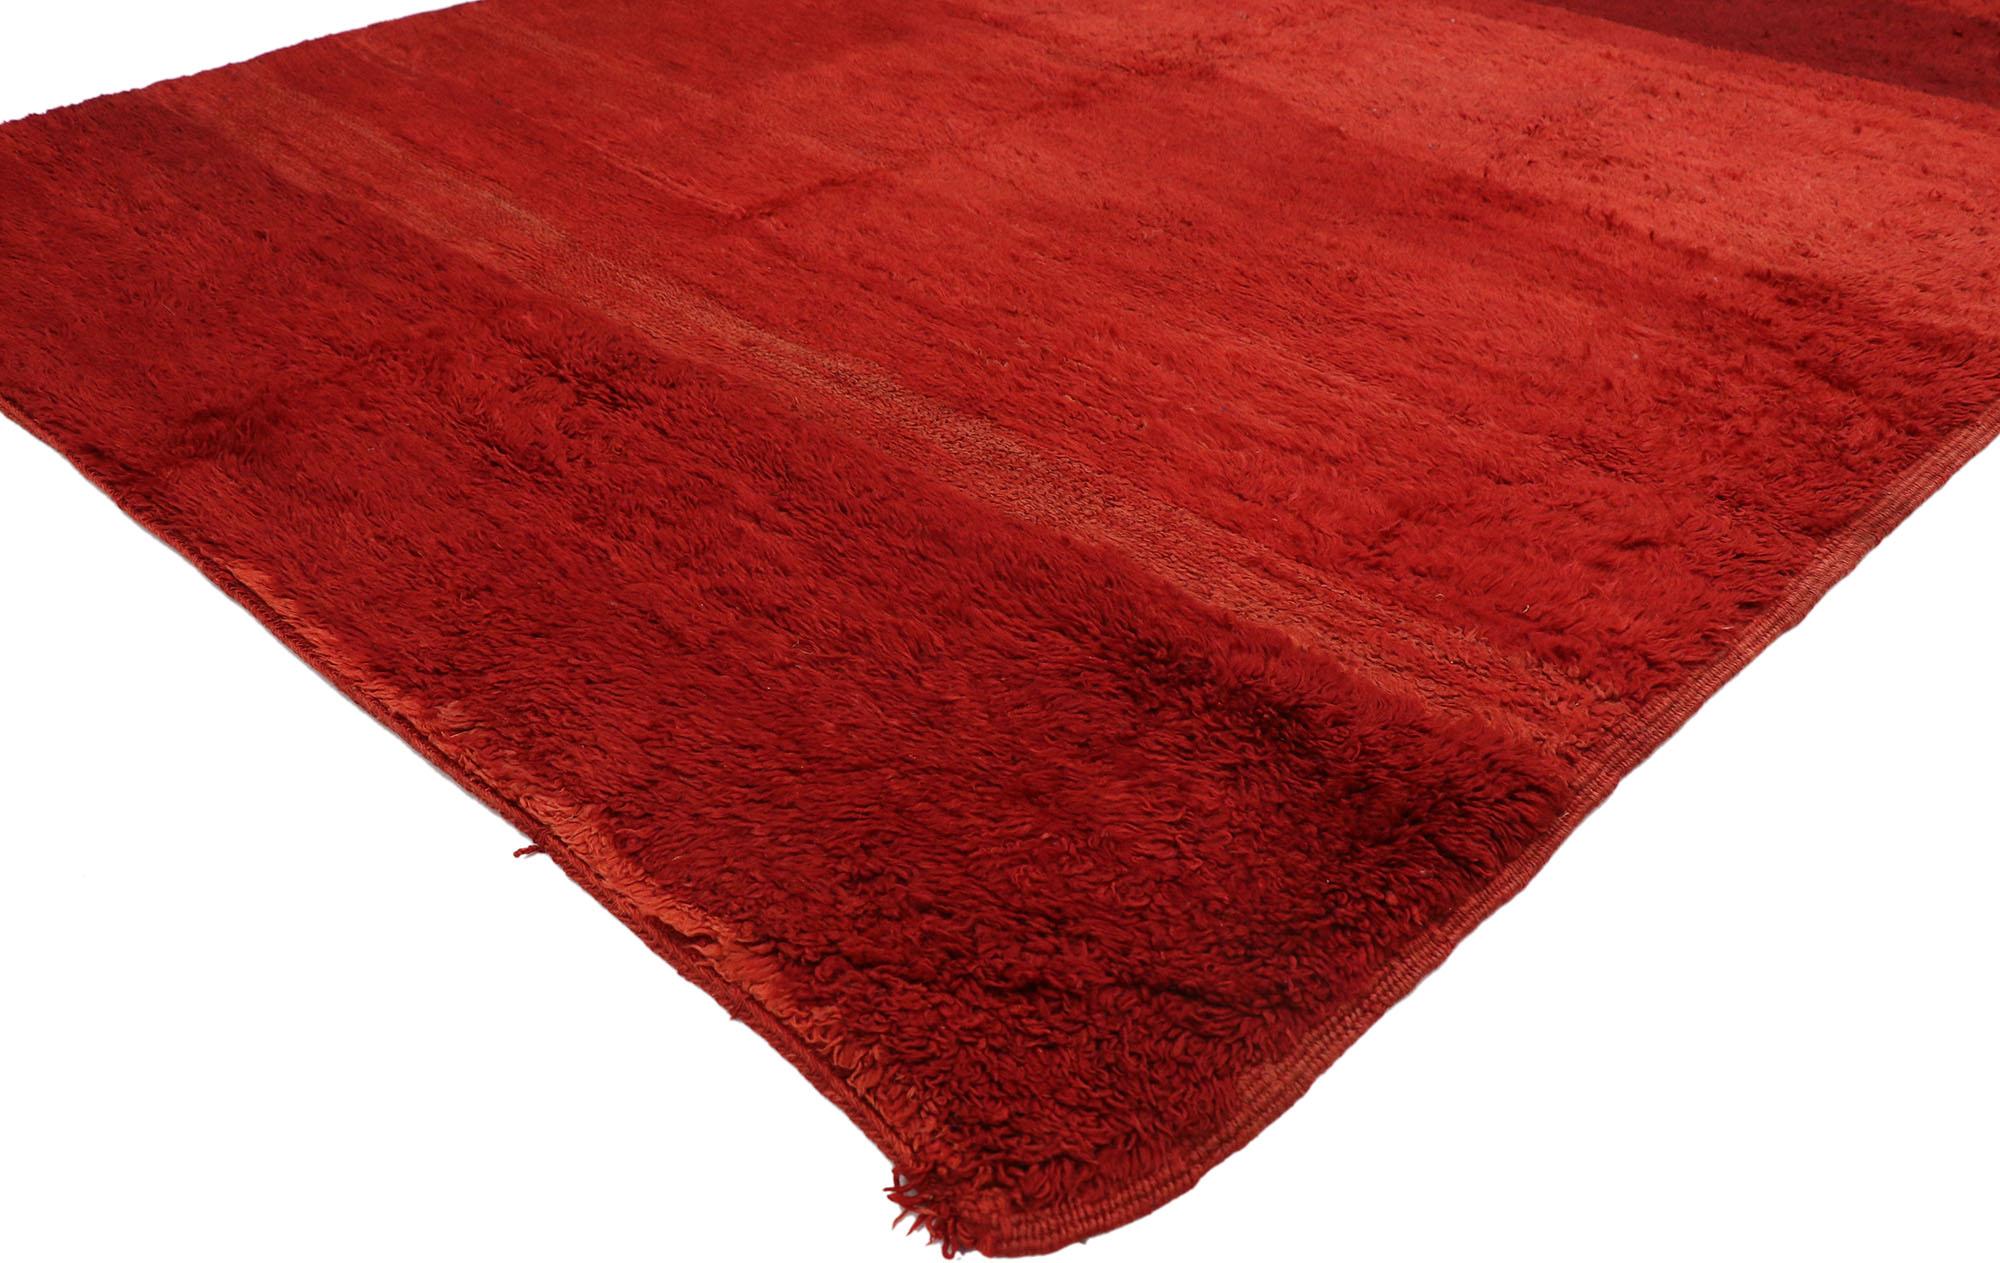 20951 Vintage Red Beni Mrirt Moroccan Rug, 05'06 x 09'08. Behold the captivating allure of this hand-knotted wool vintage Beni Mrirt Moroccan rug, a true masterpiece hailing from the Mrirt region in the Middle Atlas Mountains and meticulously